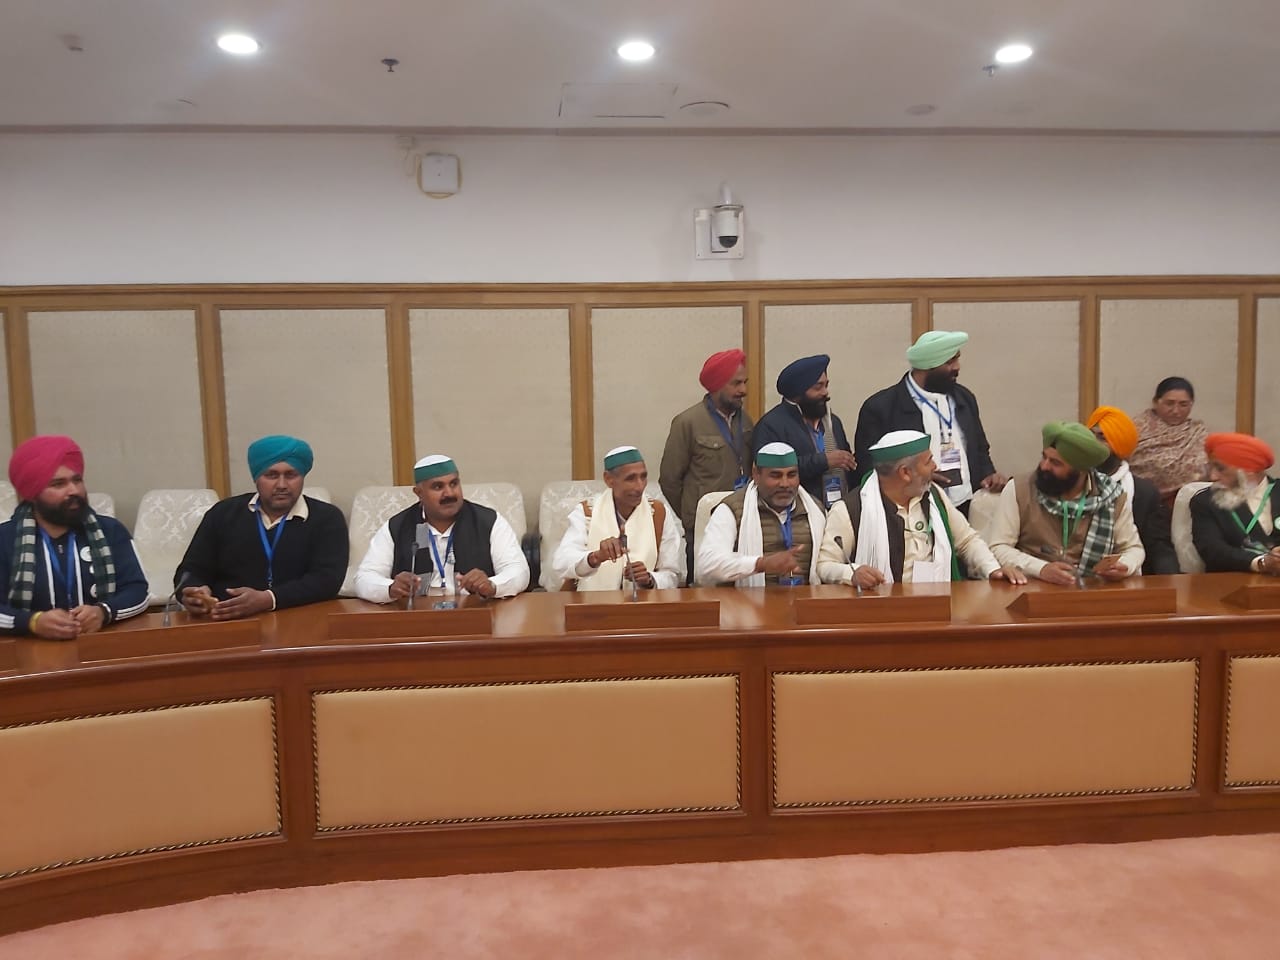 11th round of meeting between farmers and Centre inconclusive as Narendra Singh Tomar asked farmers to reconsider proposal for suspending farm laws 2020.